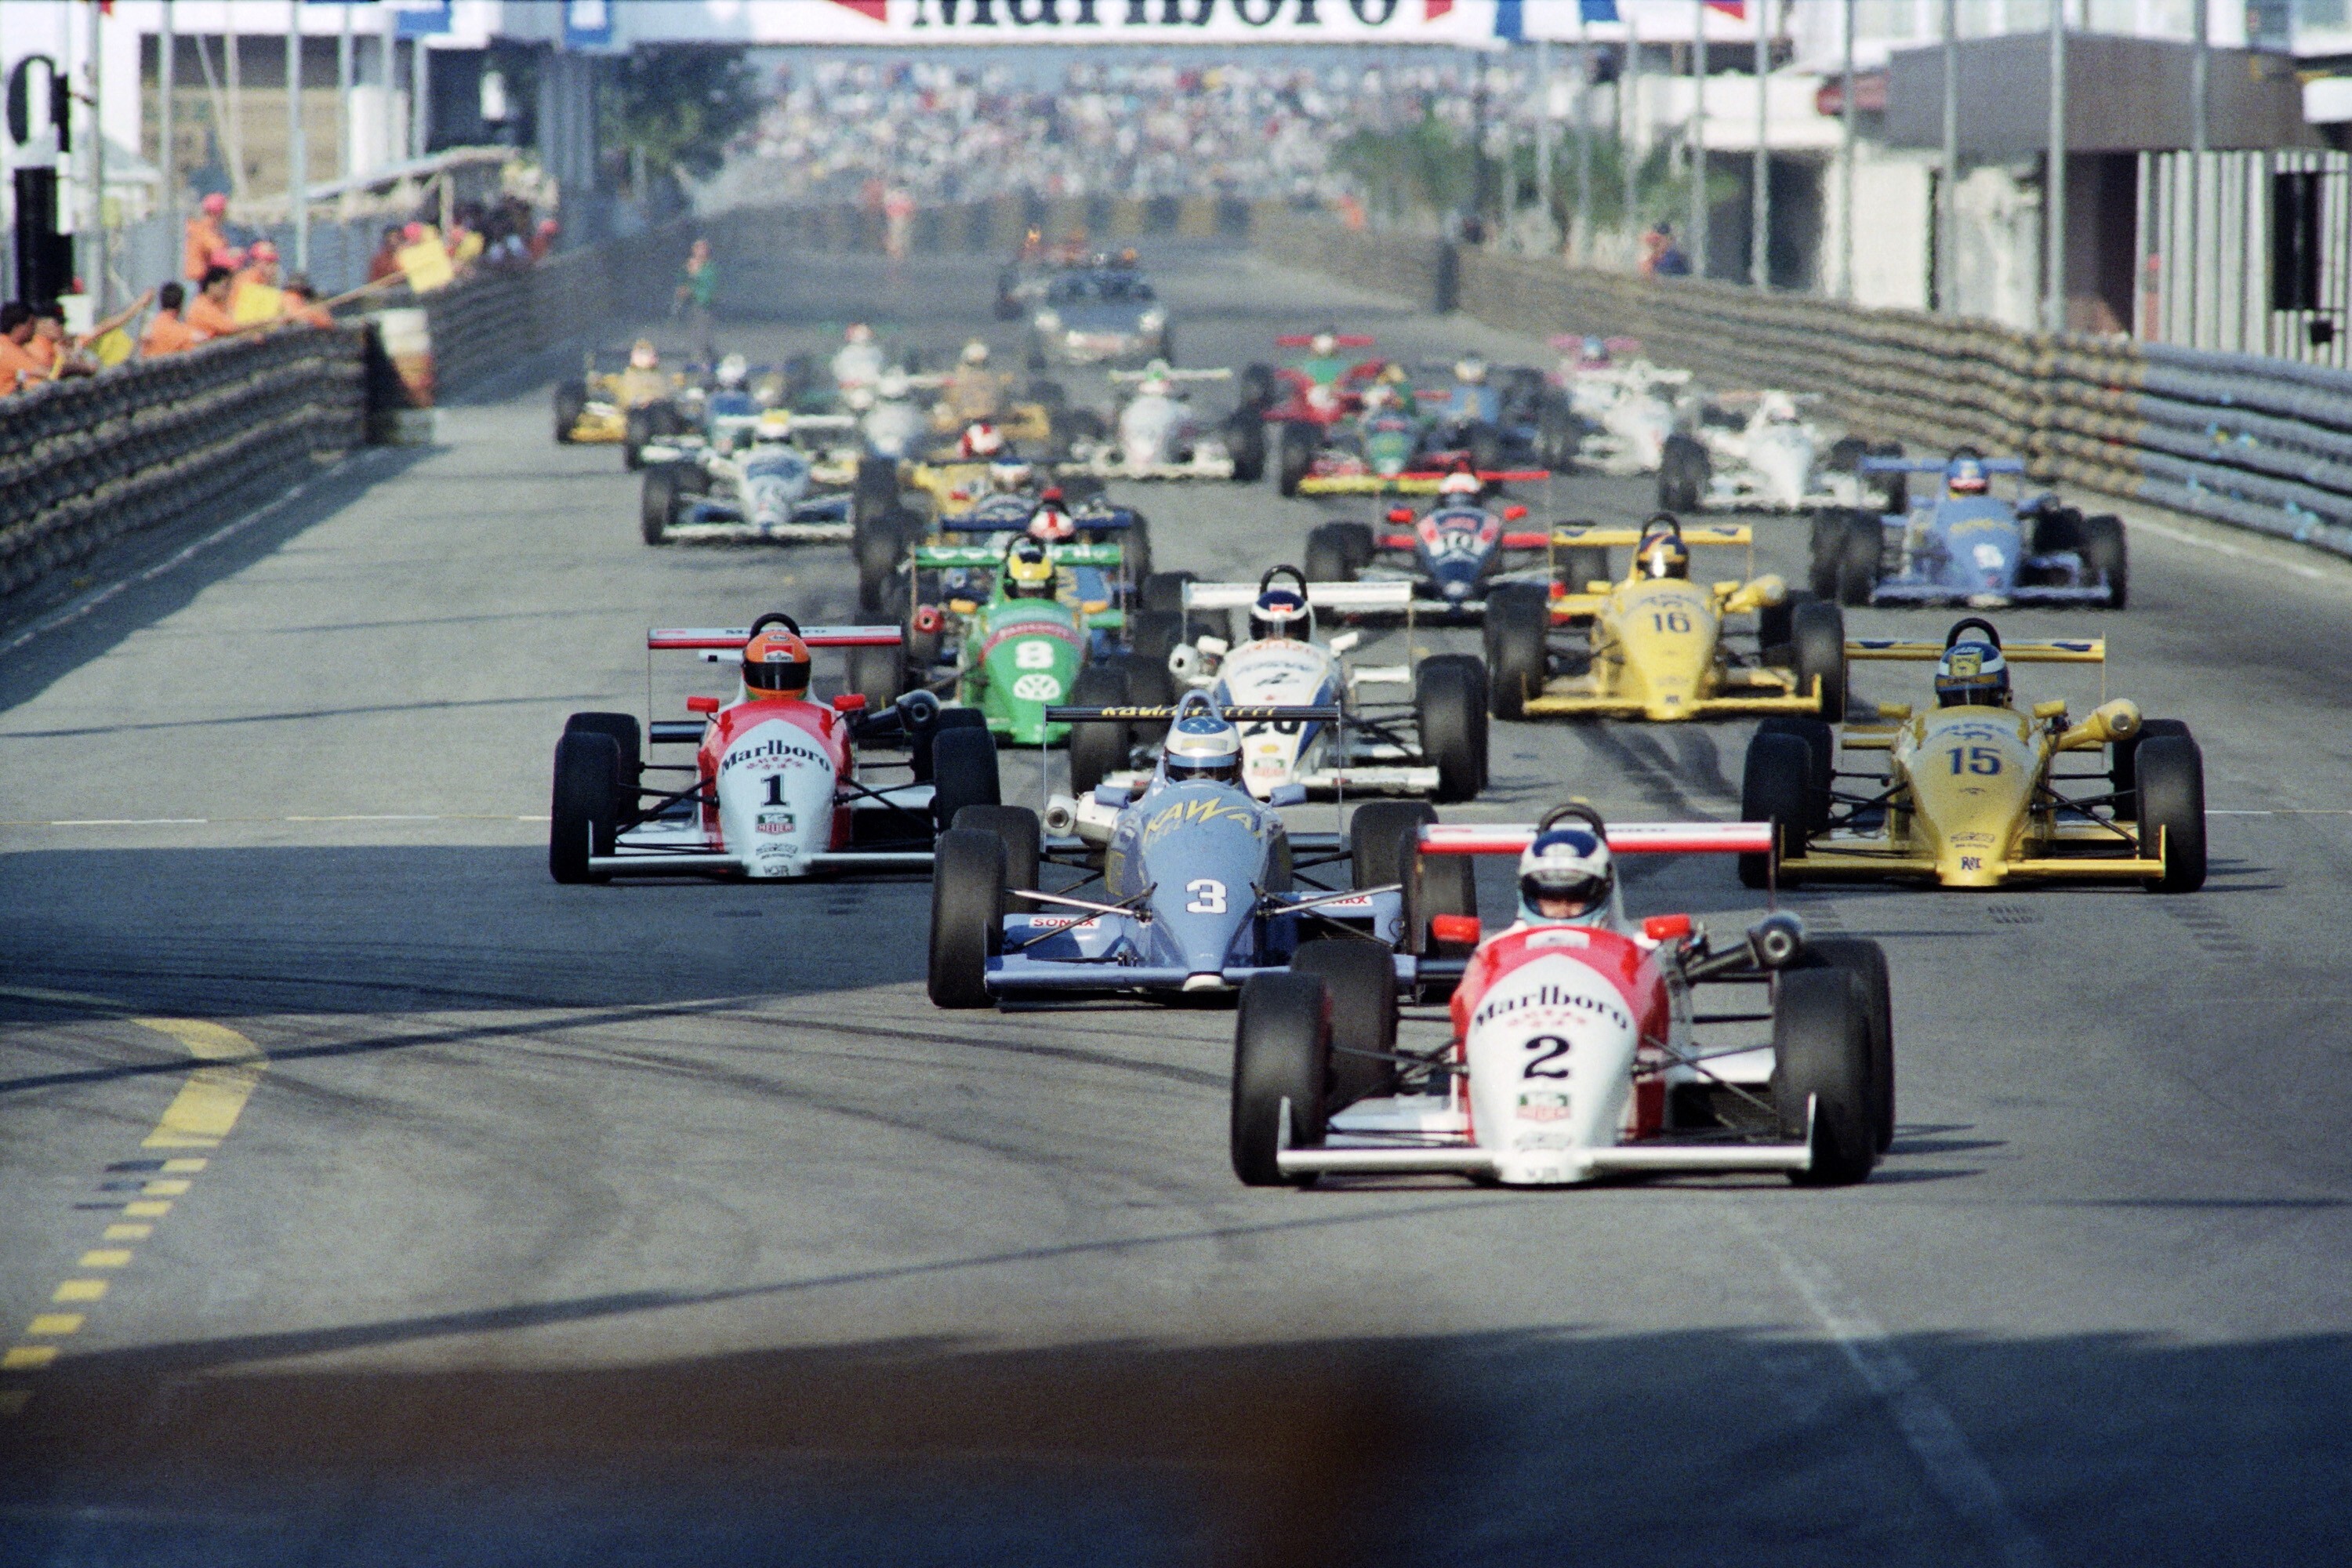 Michael Schumacher (blue car in second place) and Mika Hakkinen (red car at front) during the Macau F3 Grand Prix in 1990. Photo: Mandel Ngan/AFP